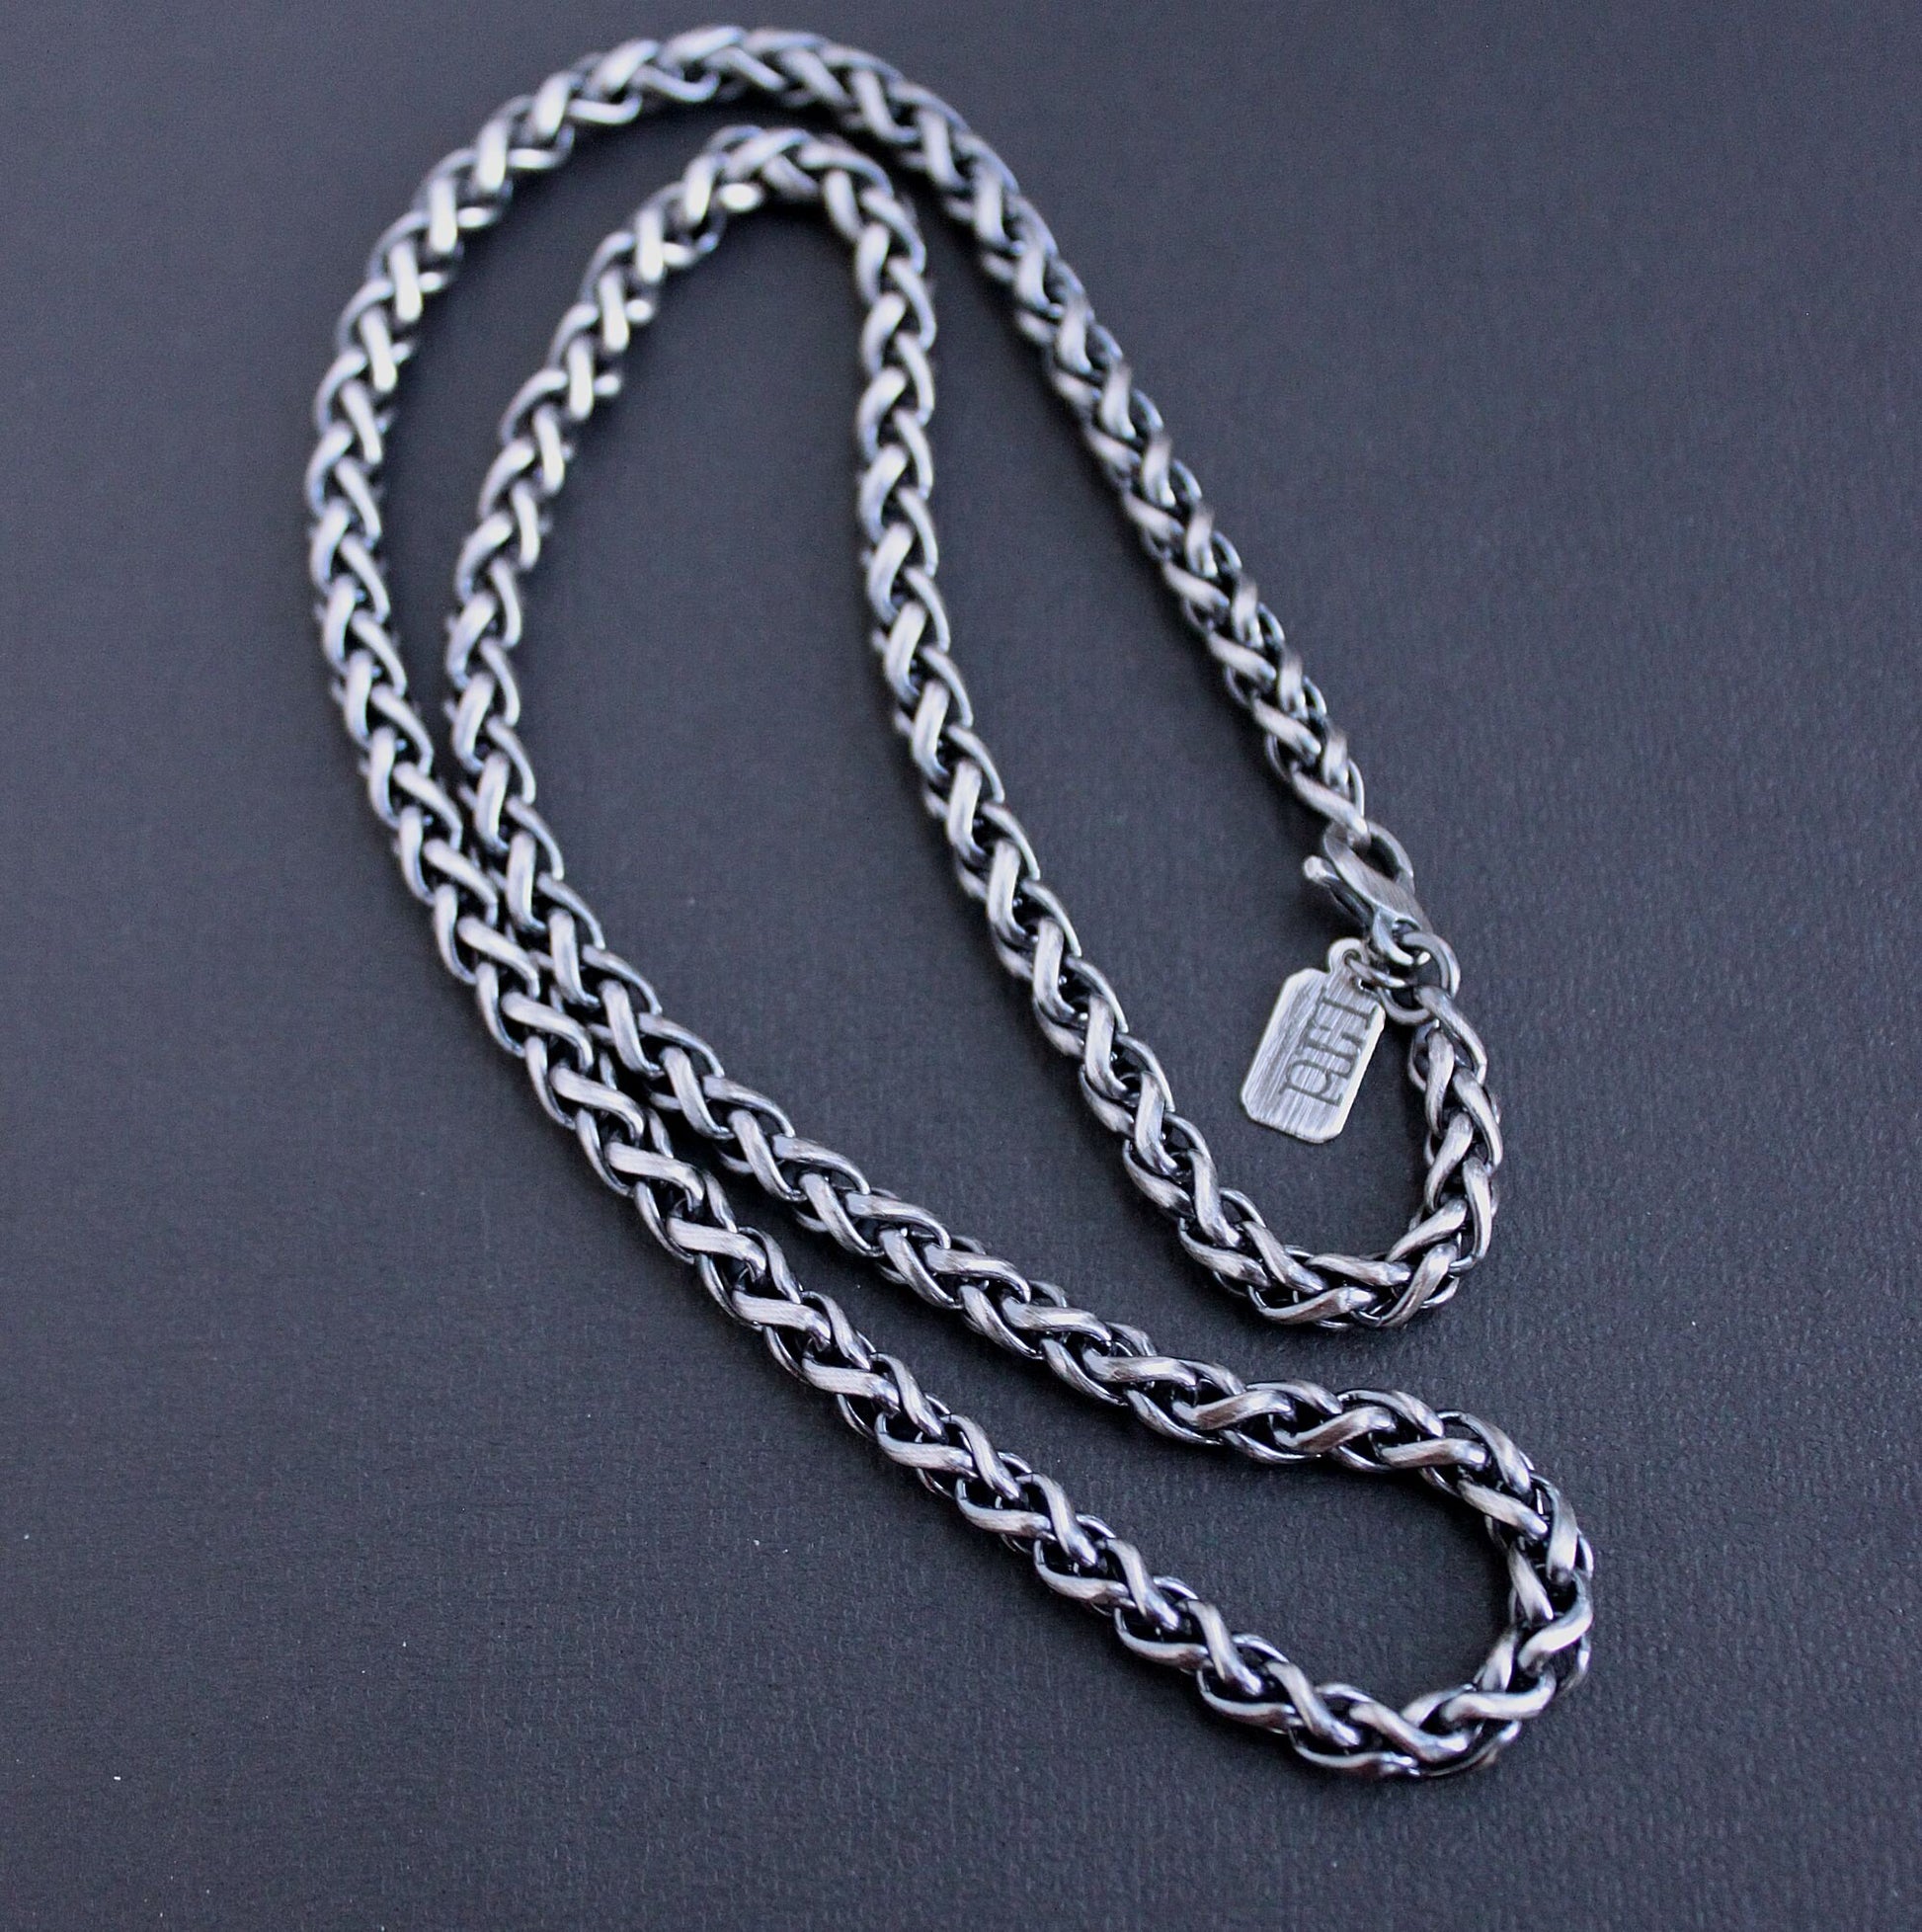 Men's Sterling Silver Wheat Chain Necklace